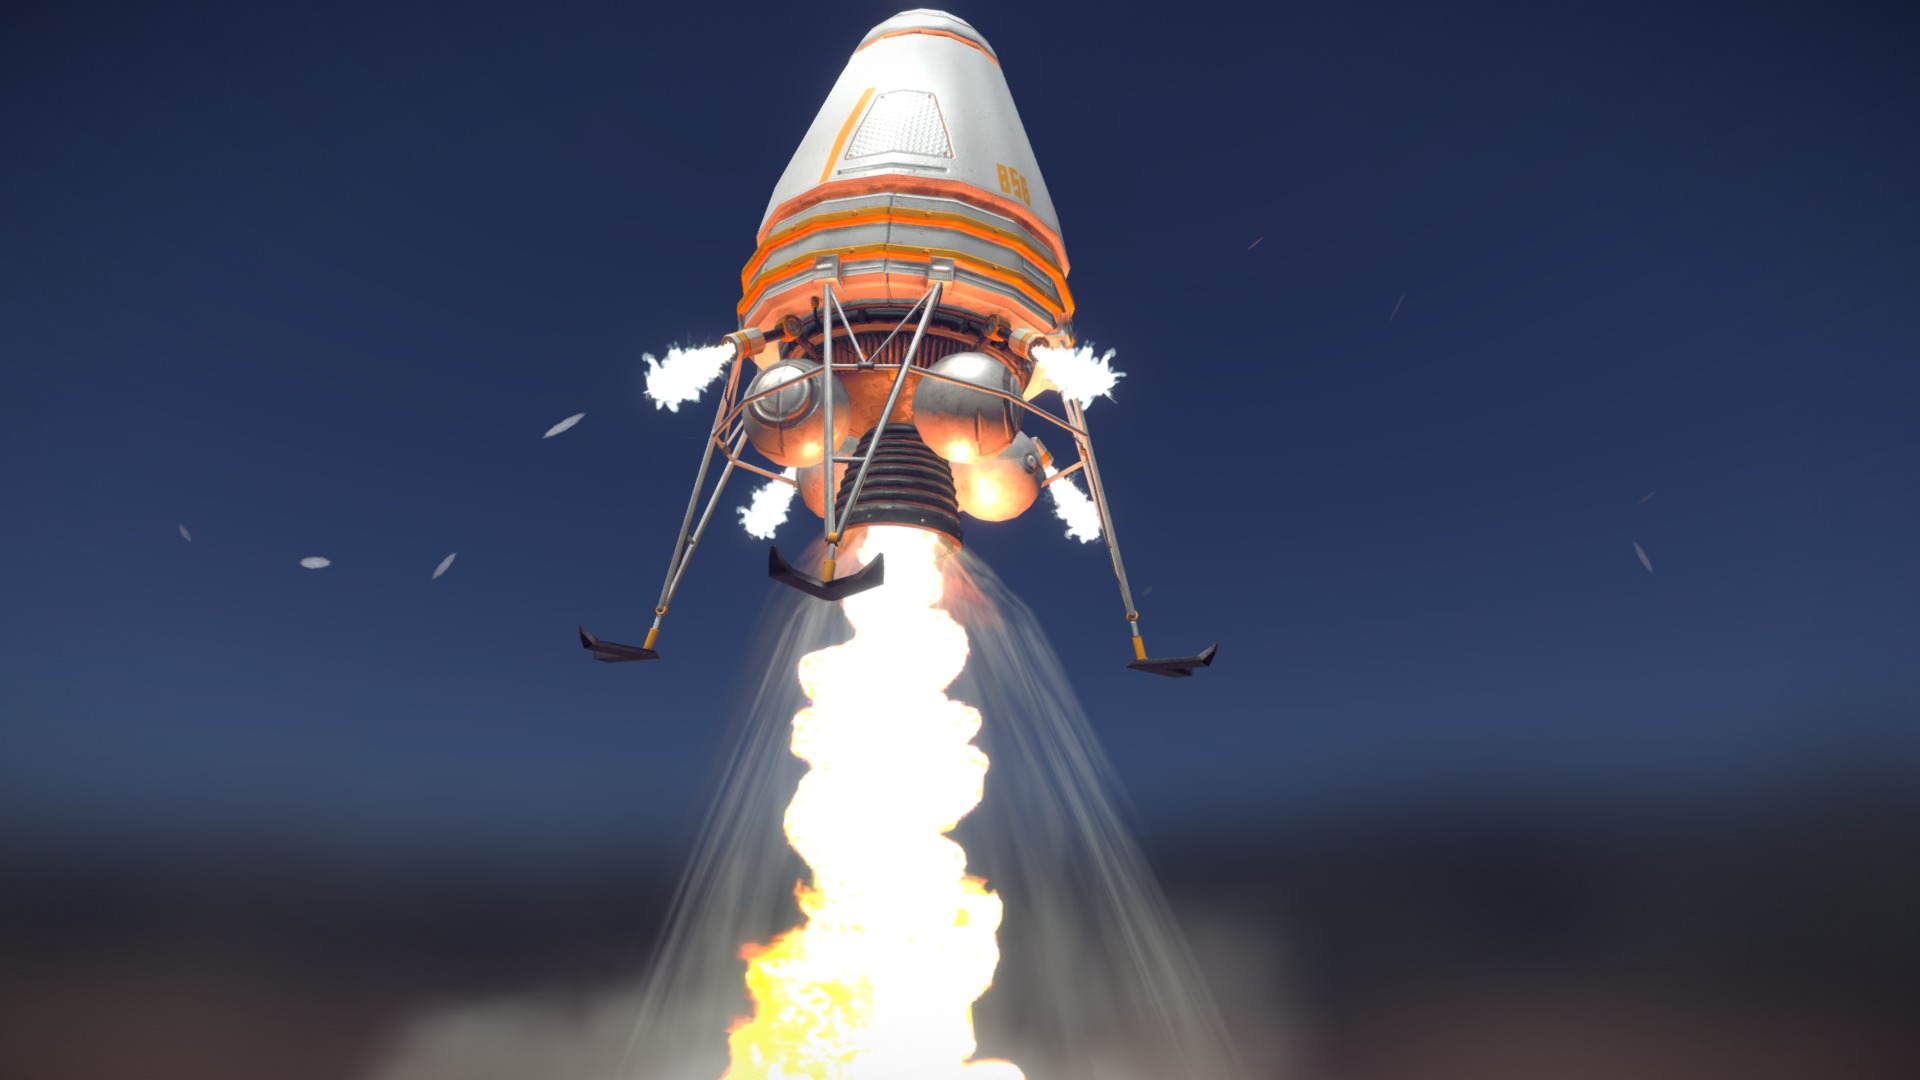 3D model Rocket - This is a 3D model of the Rocket. The 3D model is about a space shuttle taking off.